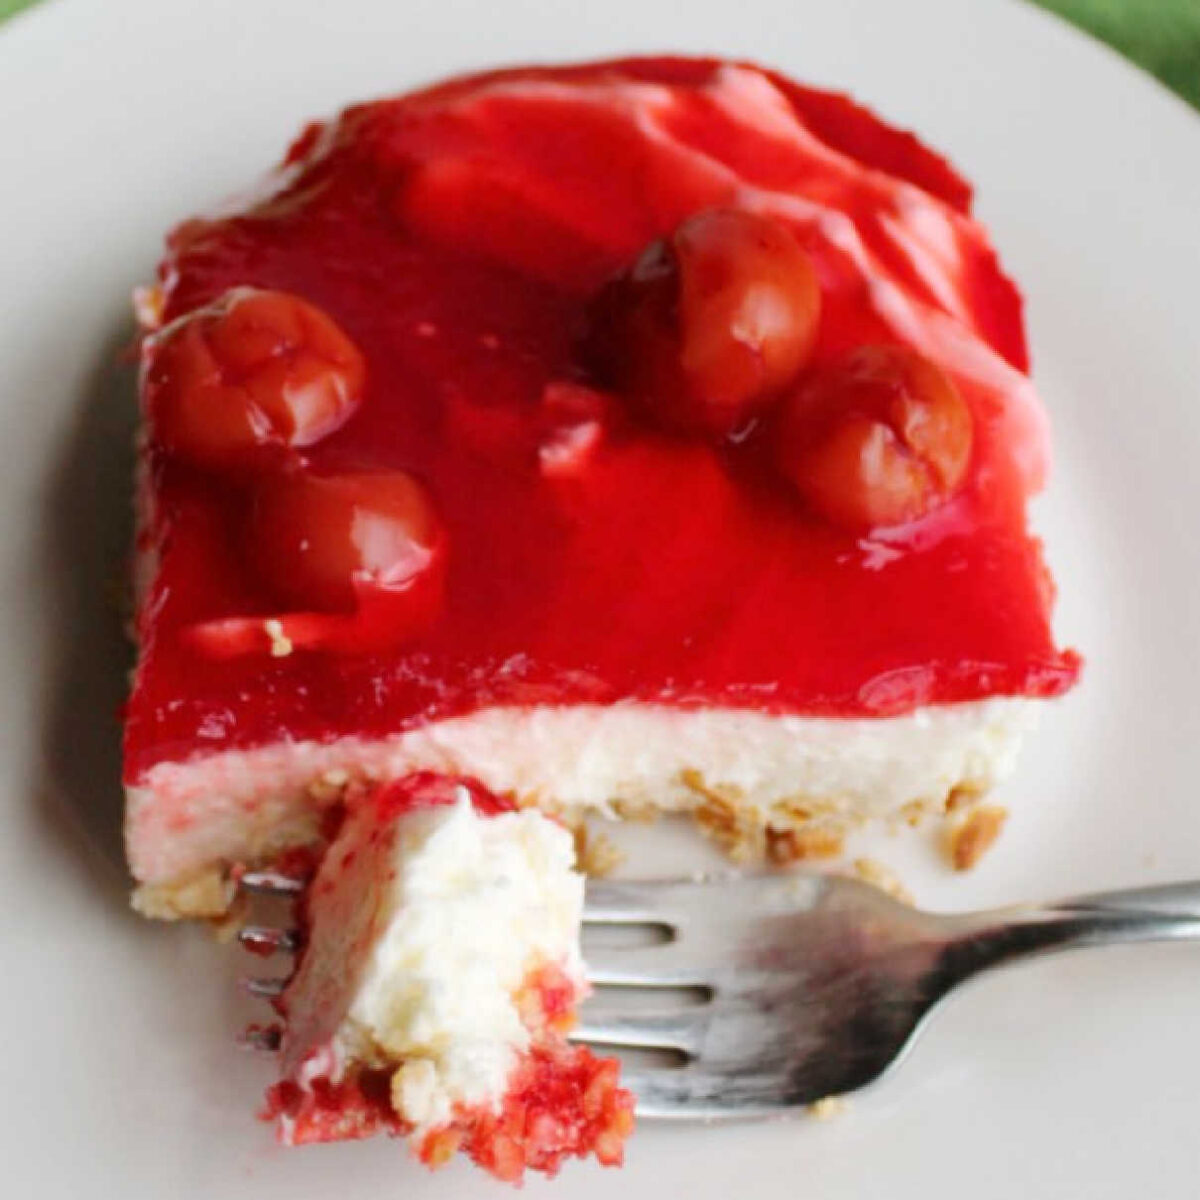 Bite of cherry pretzel salad on fork showing cream cheese center and cherry jello topping.